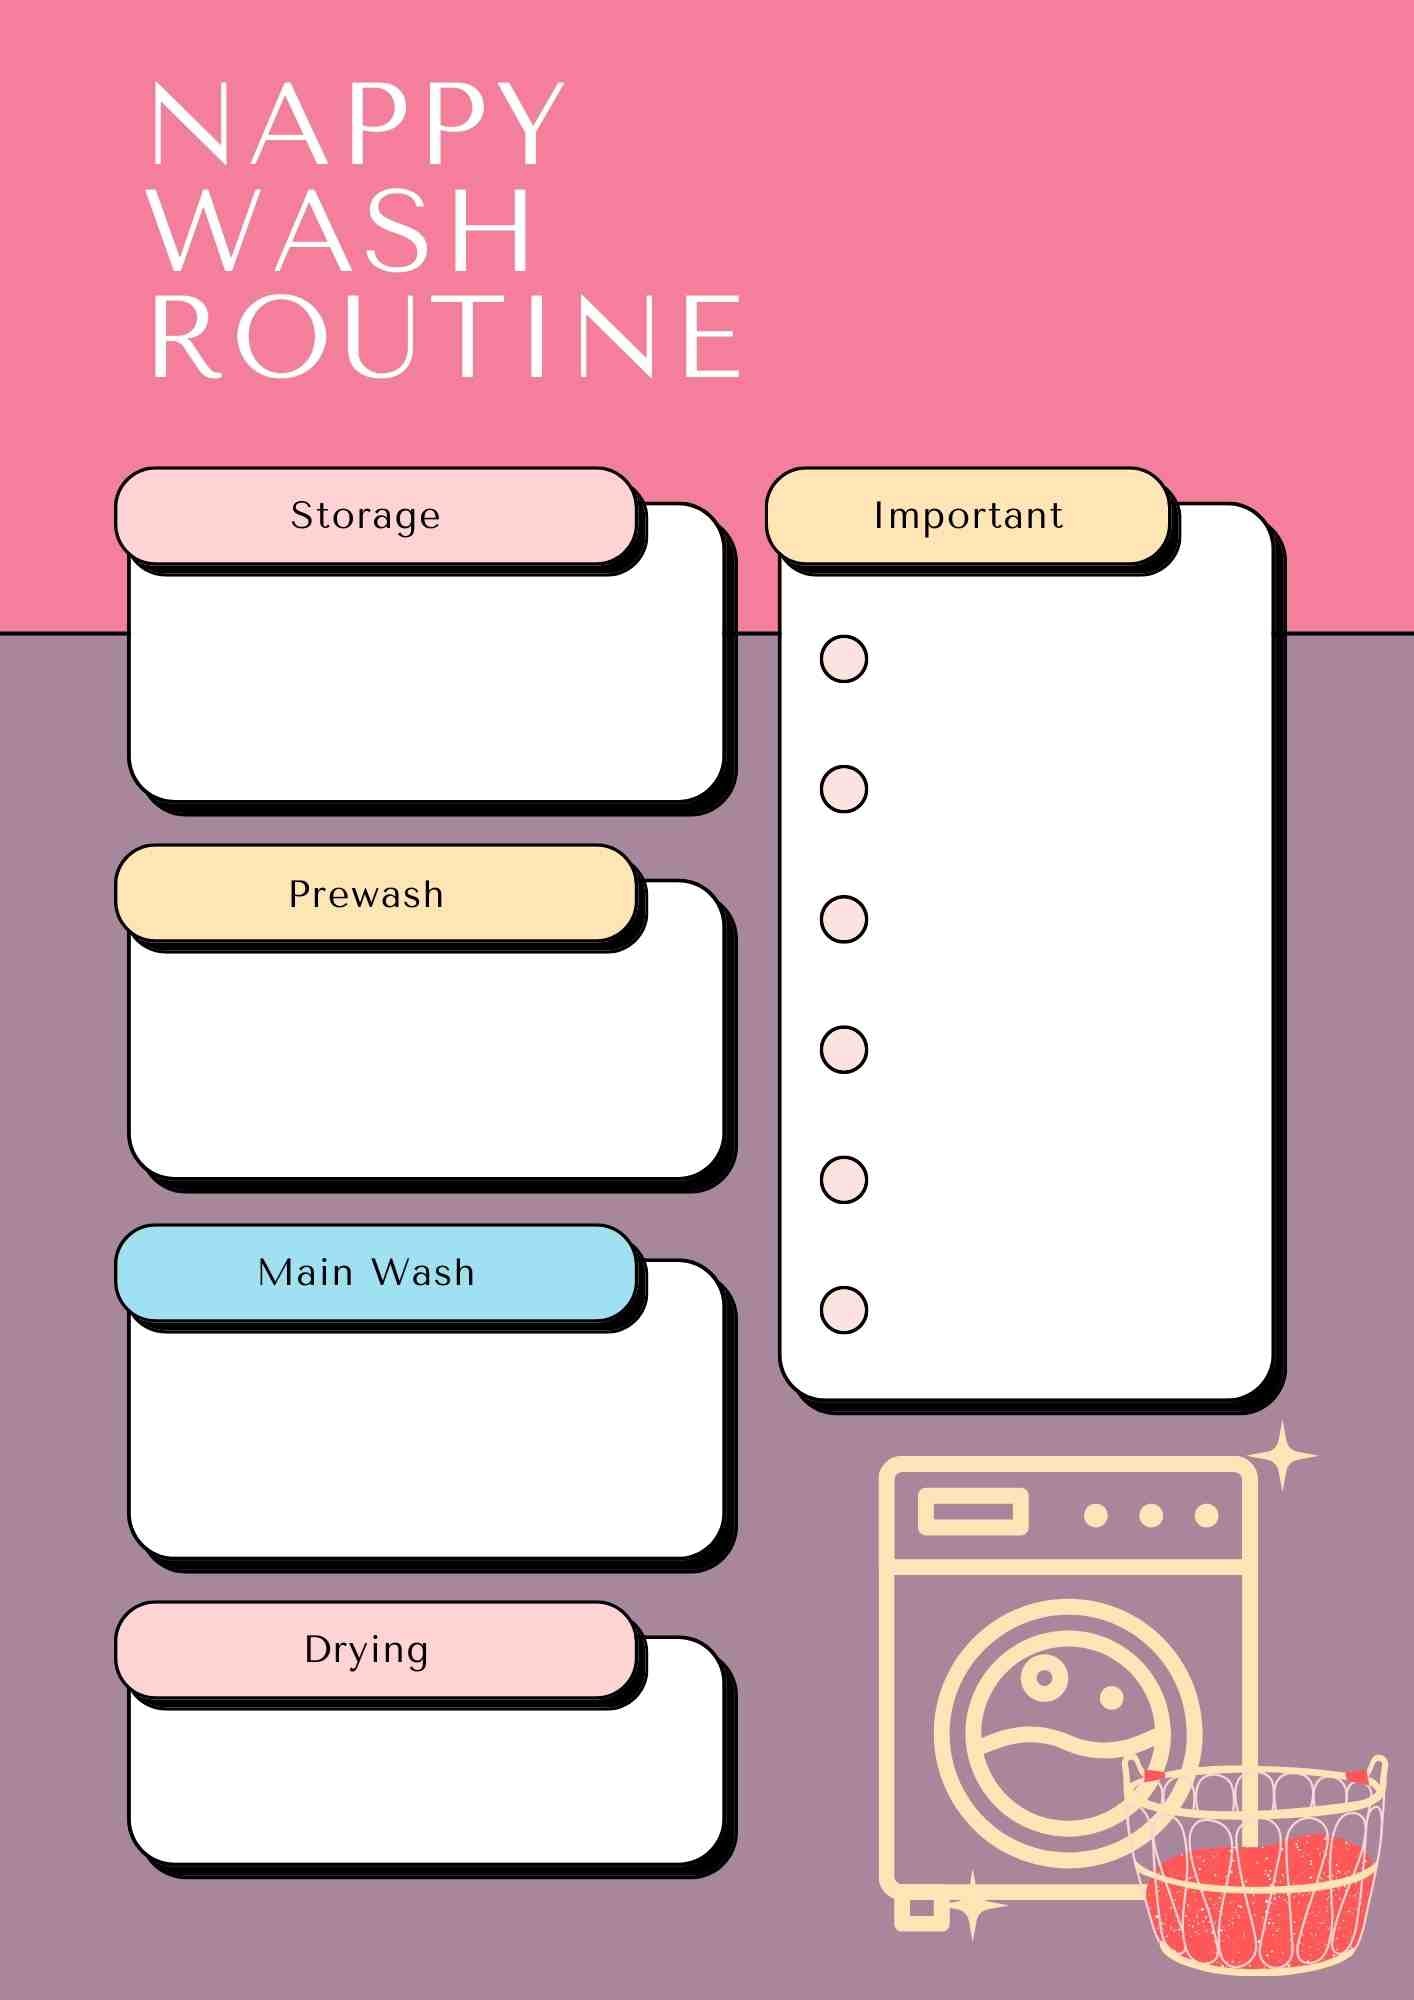 Nappy Wash Routine Template (Pink & Purple)